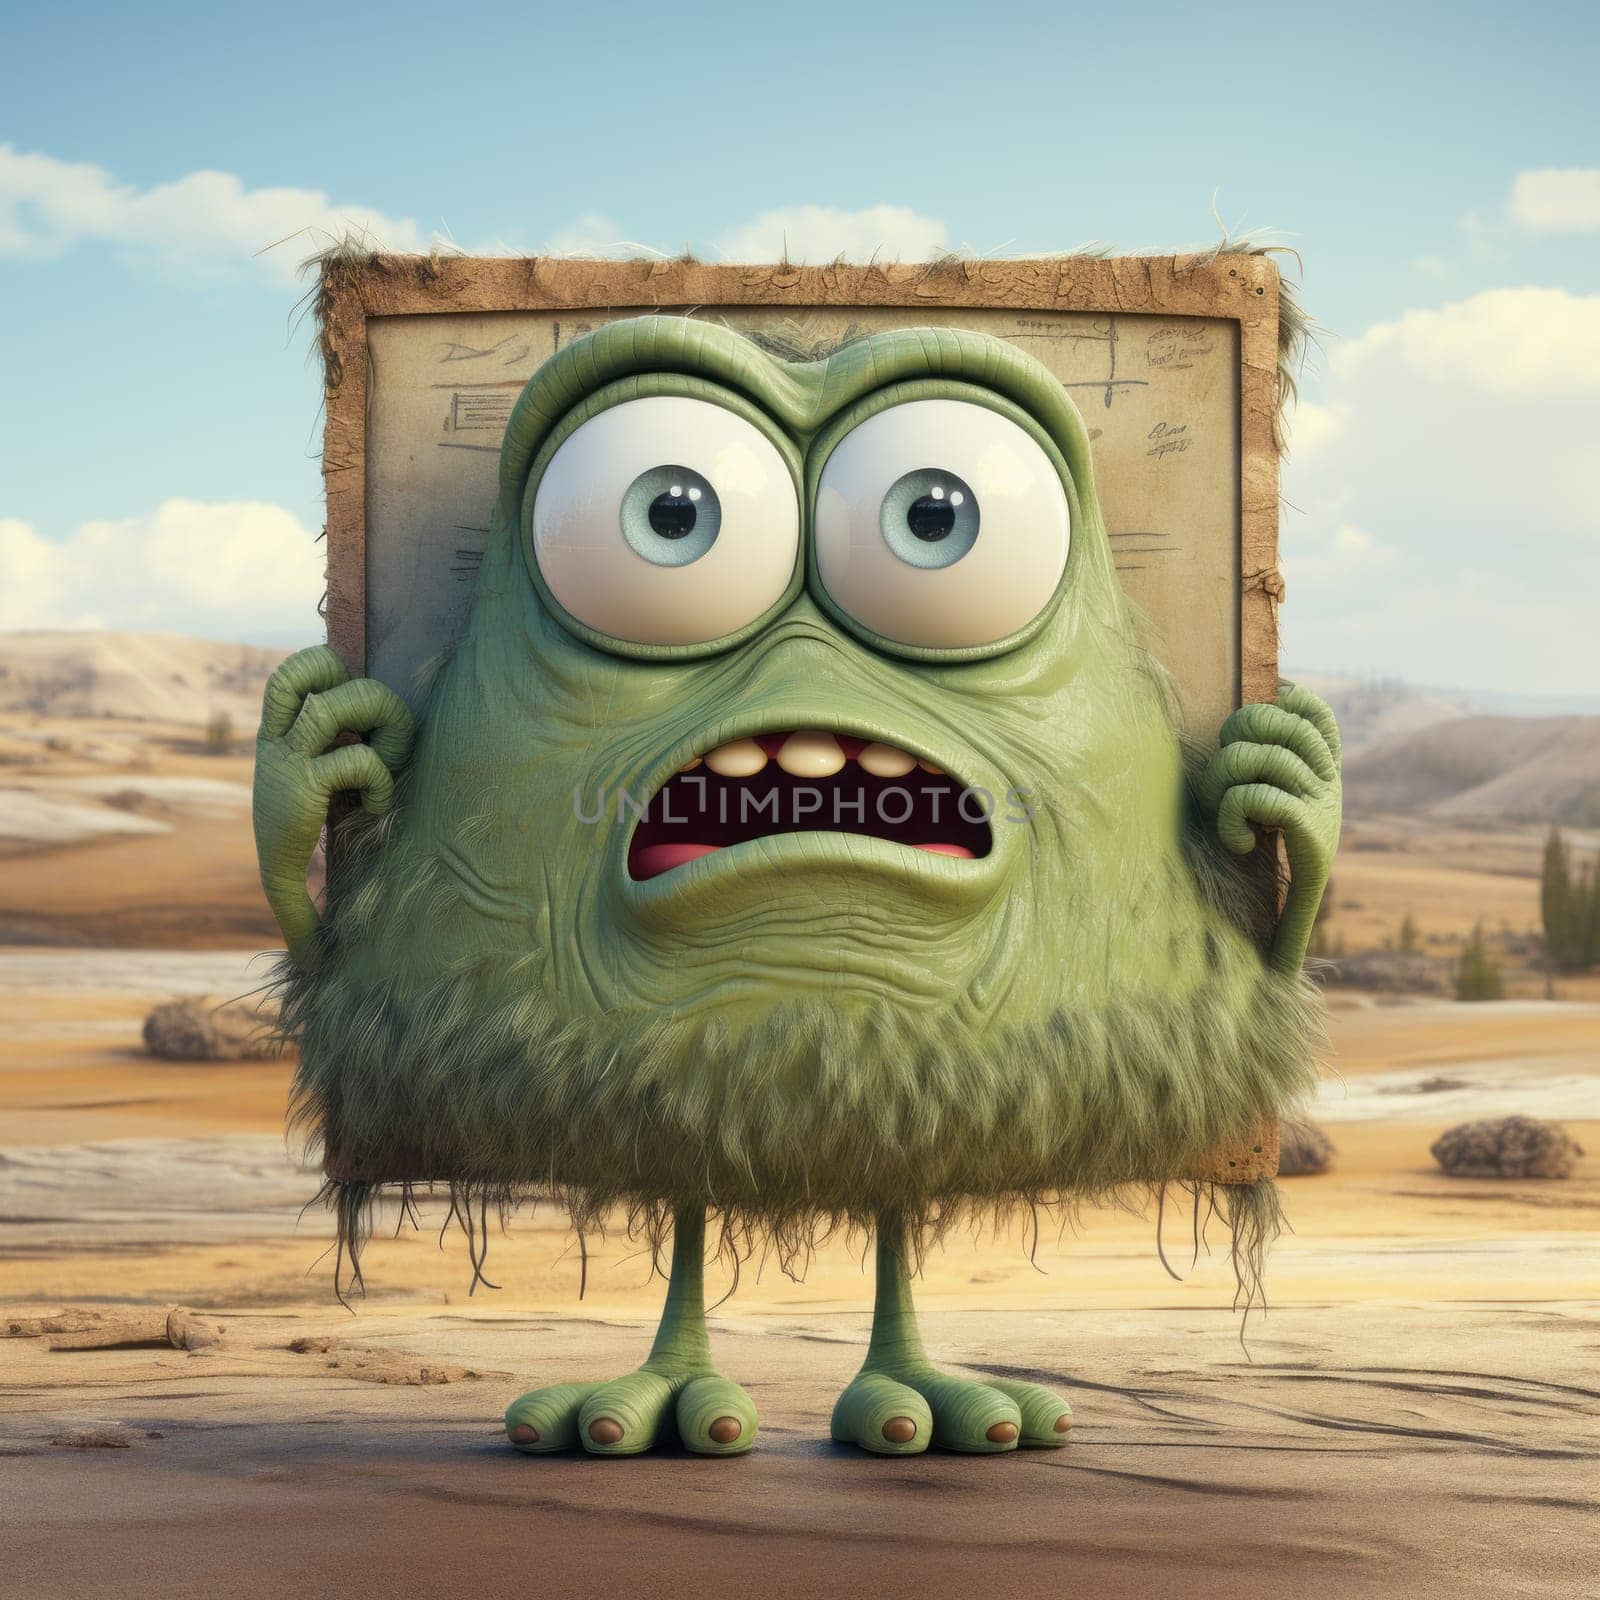 A startled green monster with large eyes clutching an aged sign in a barren desert landscape by Zakharova